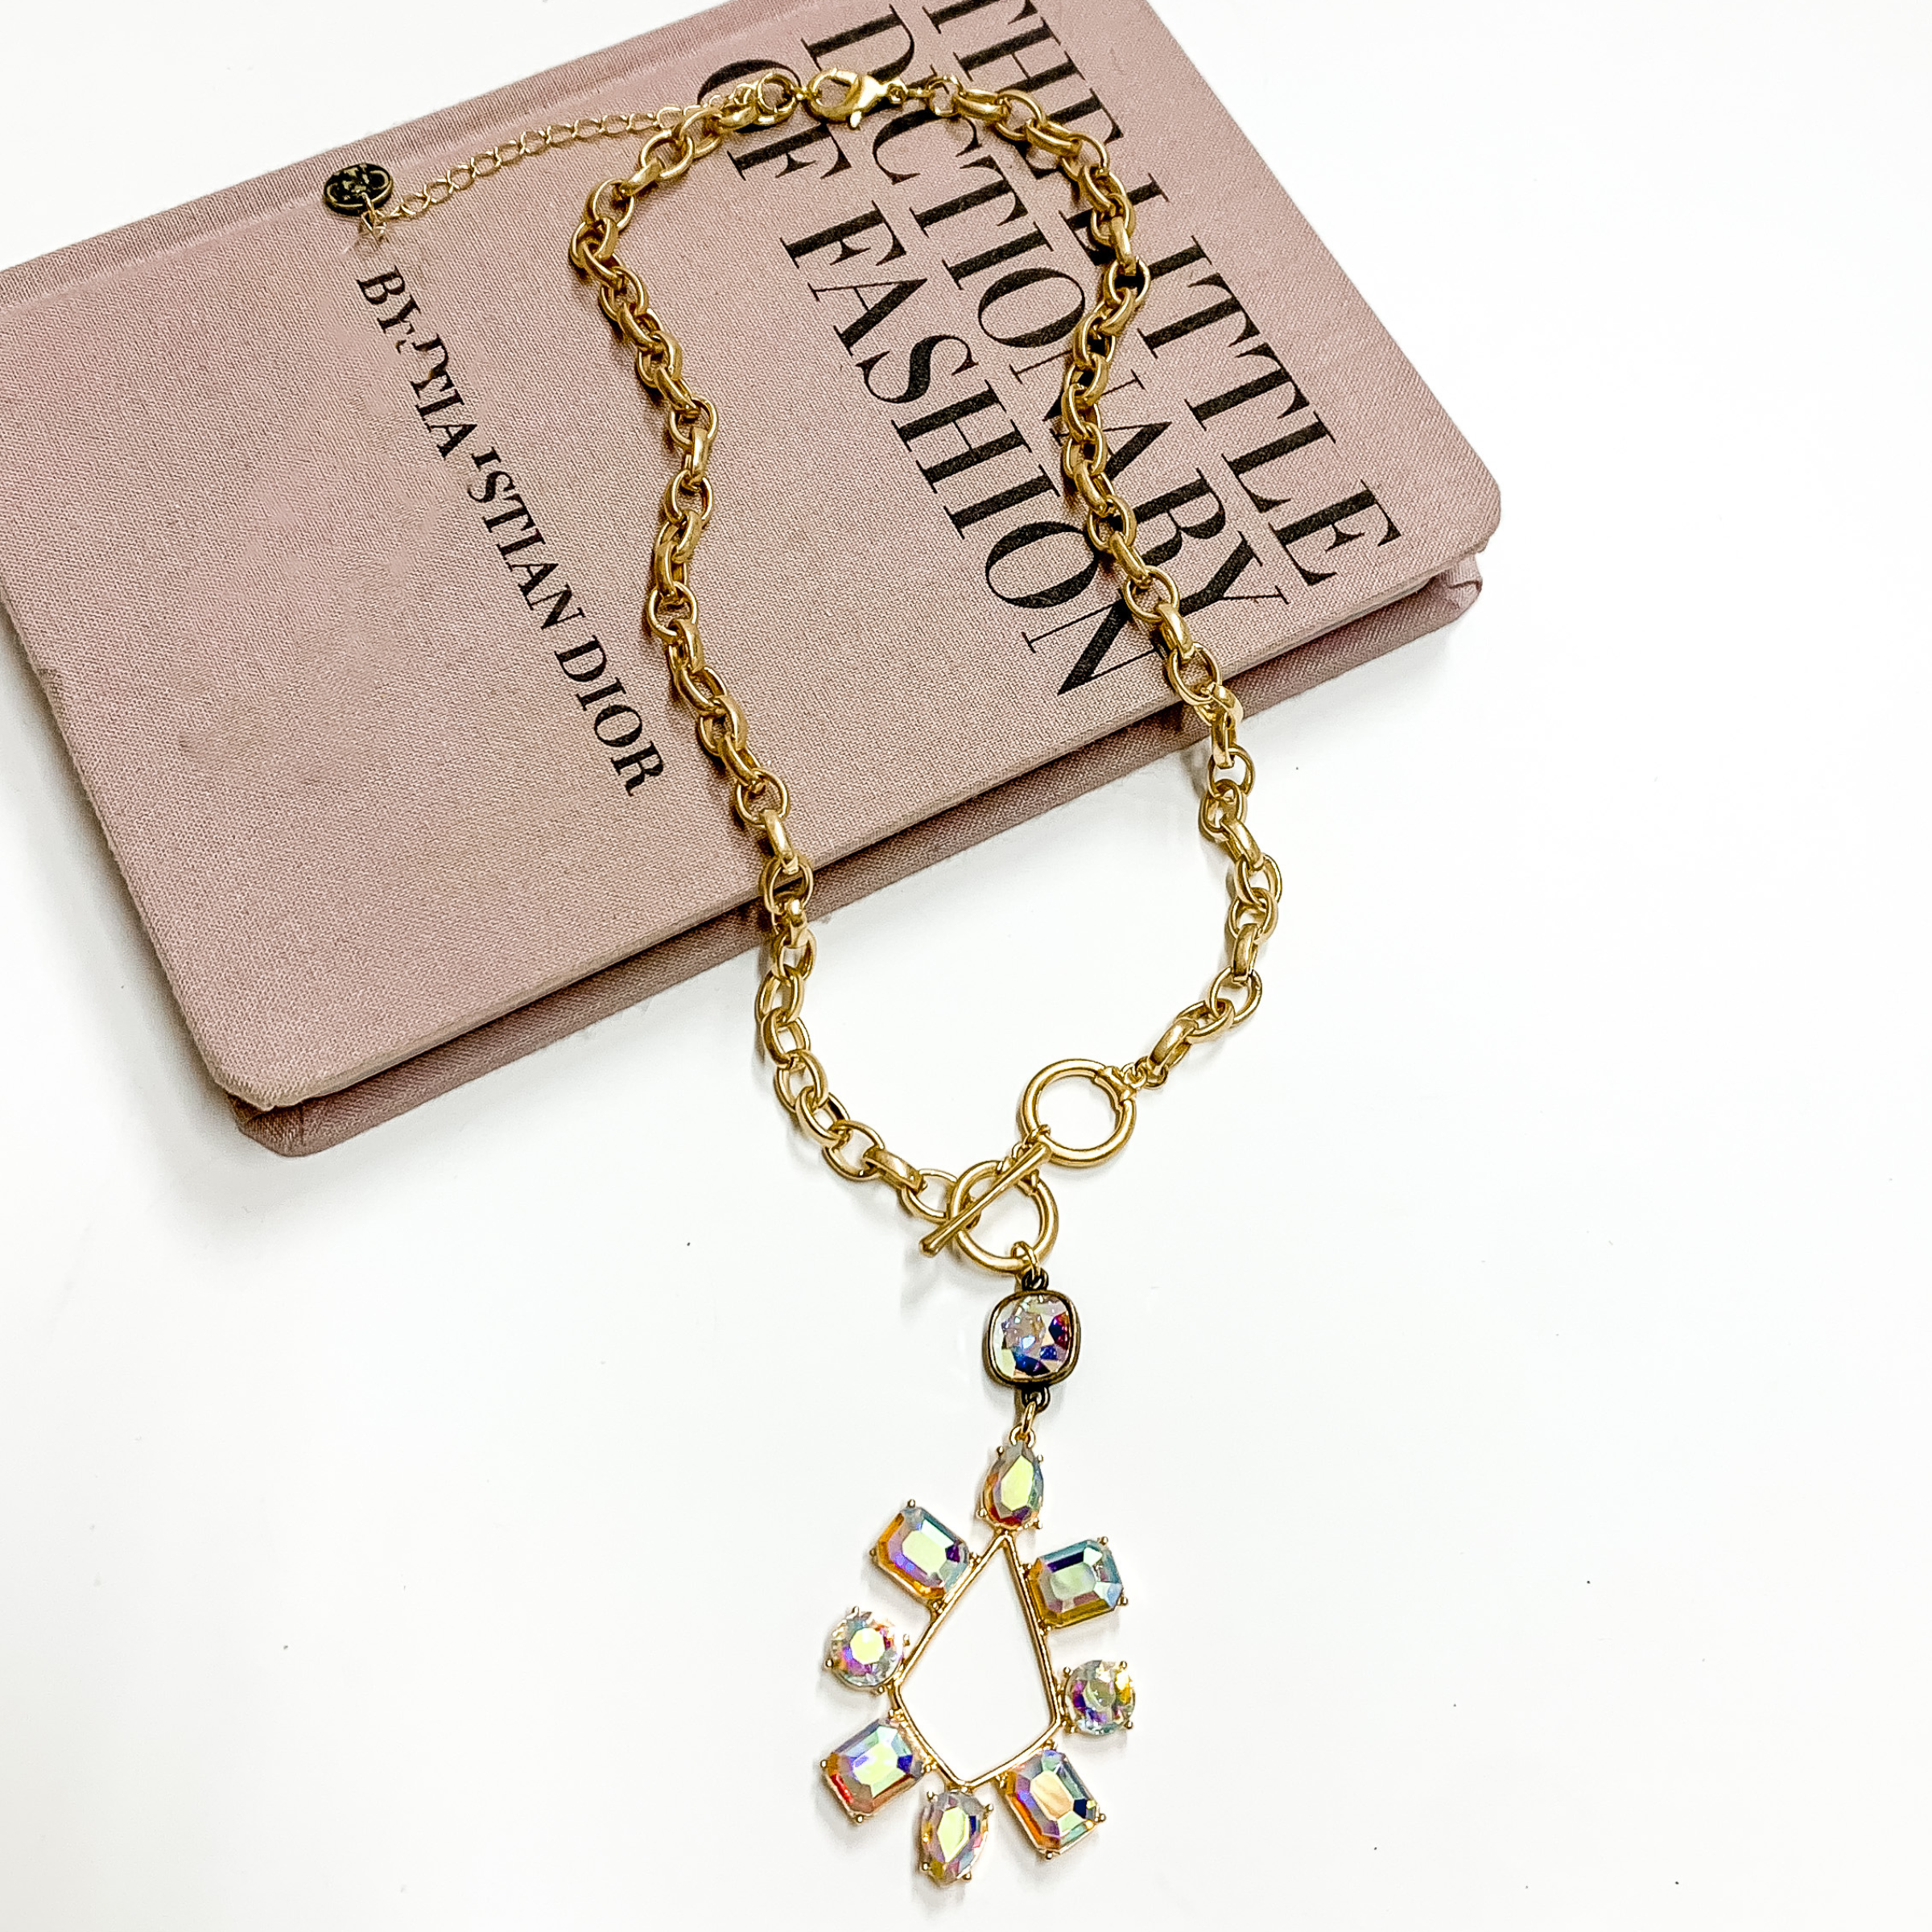 Pink Panache | Gold Tone Chain Necklace with a AB Crystal Drop and Crystal Teardrop Pendant - Giddy Up Glamour Boutique